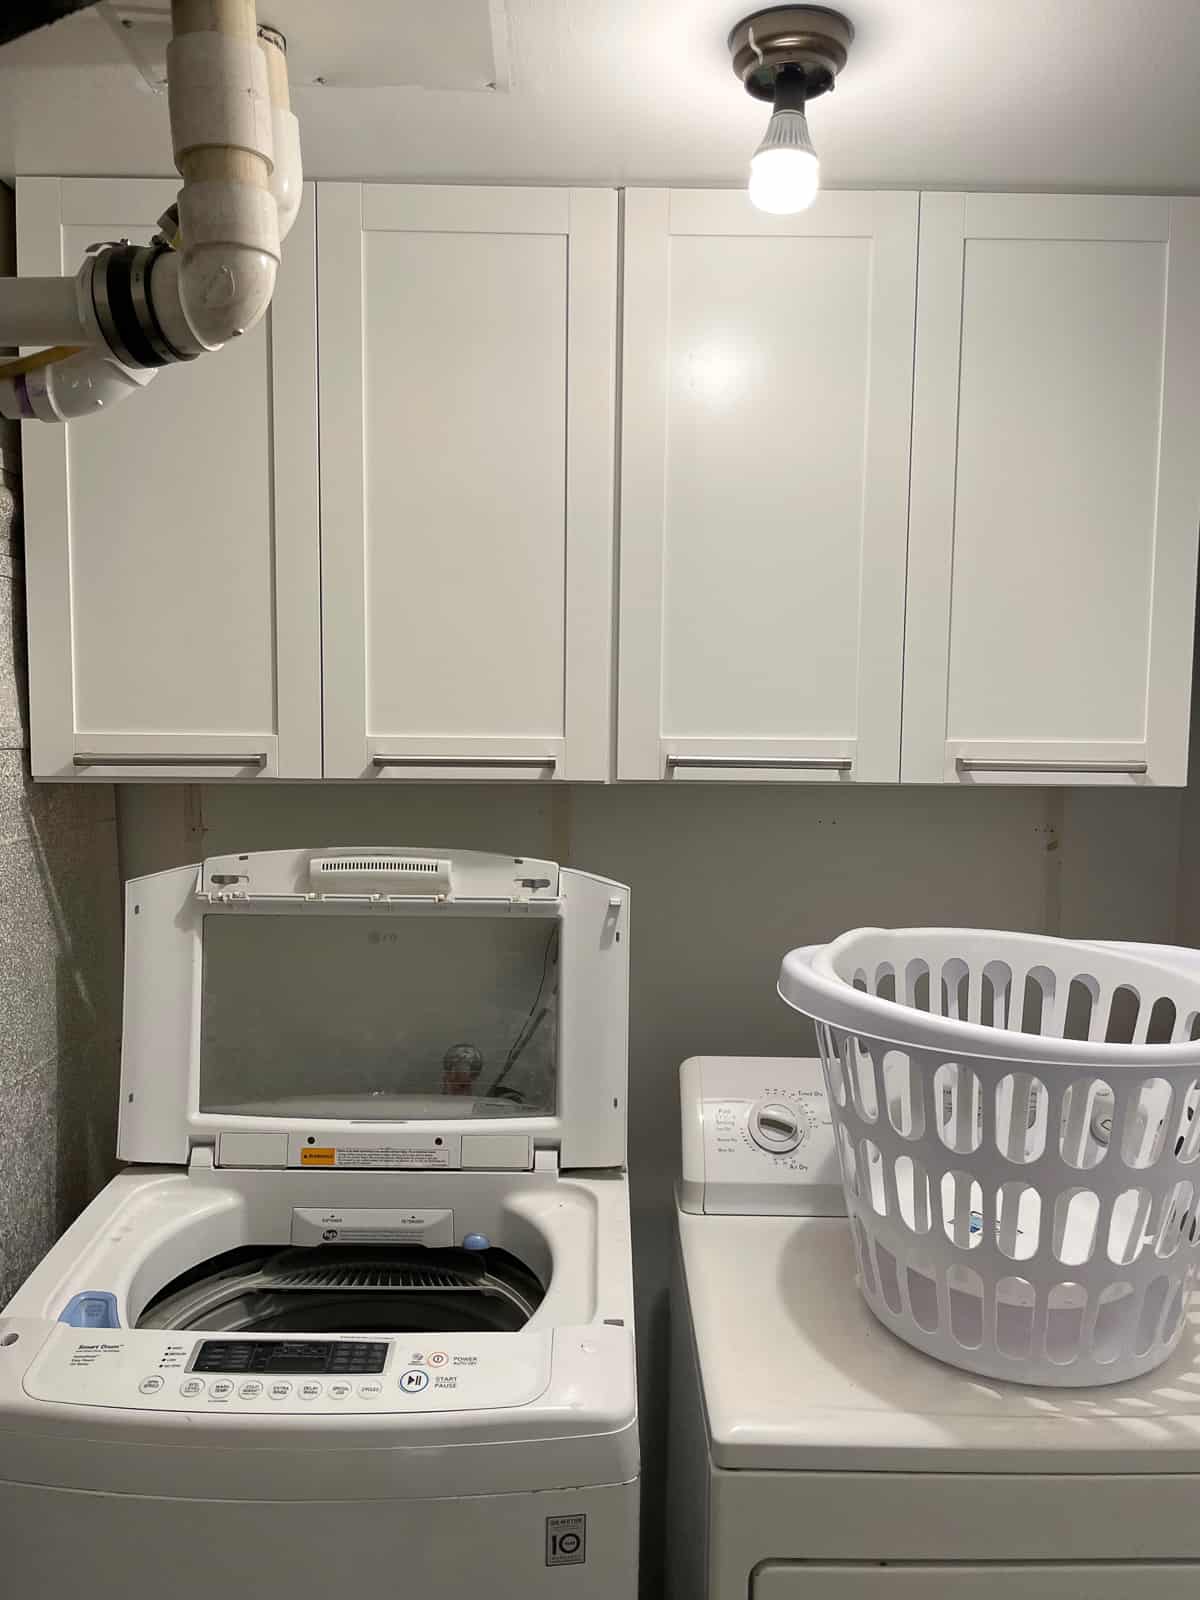 cabinets in a laundry room.